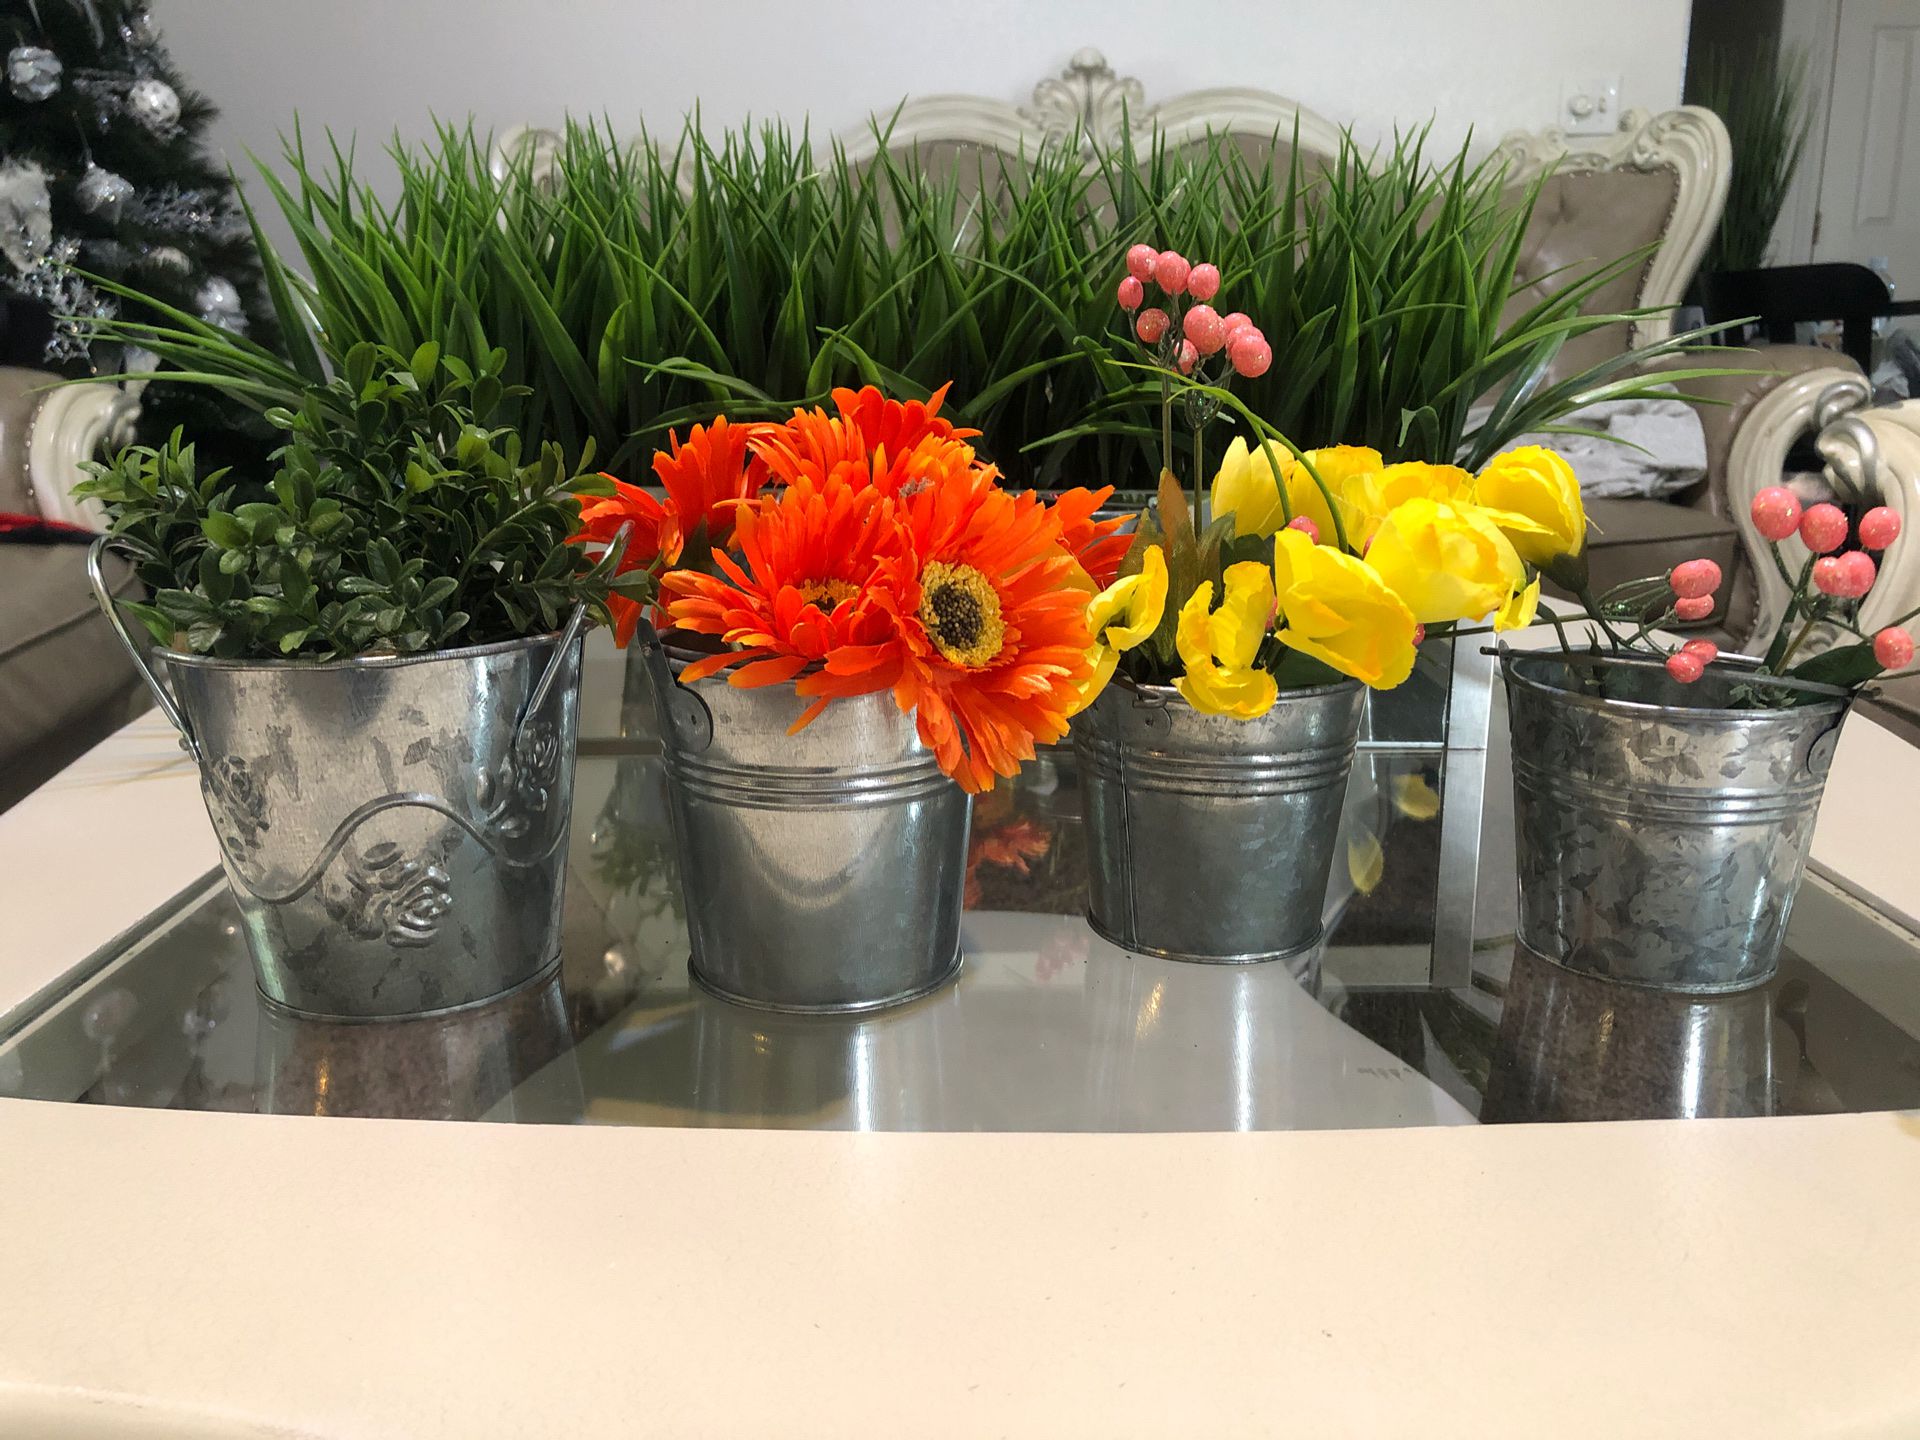 SmallMetal buckets for plants or flower flowers and plant not included